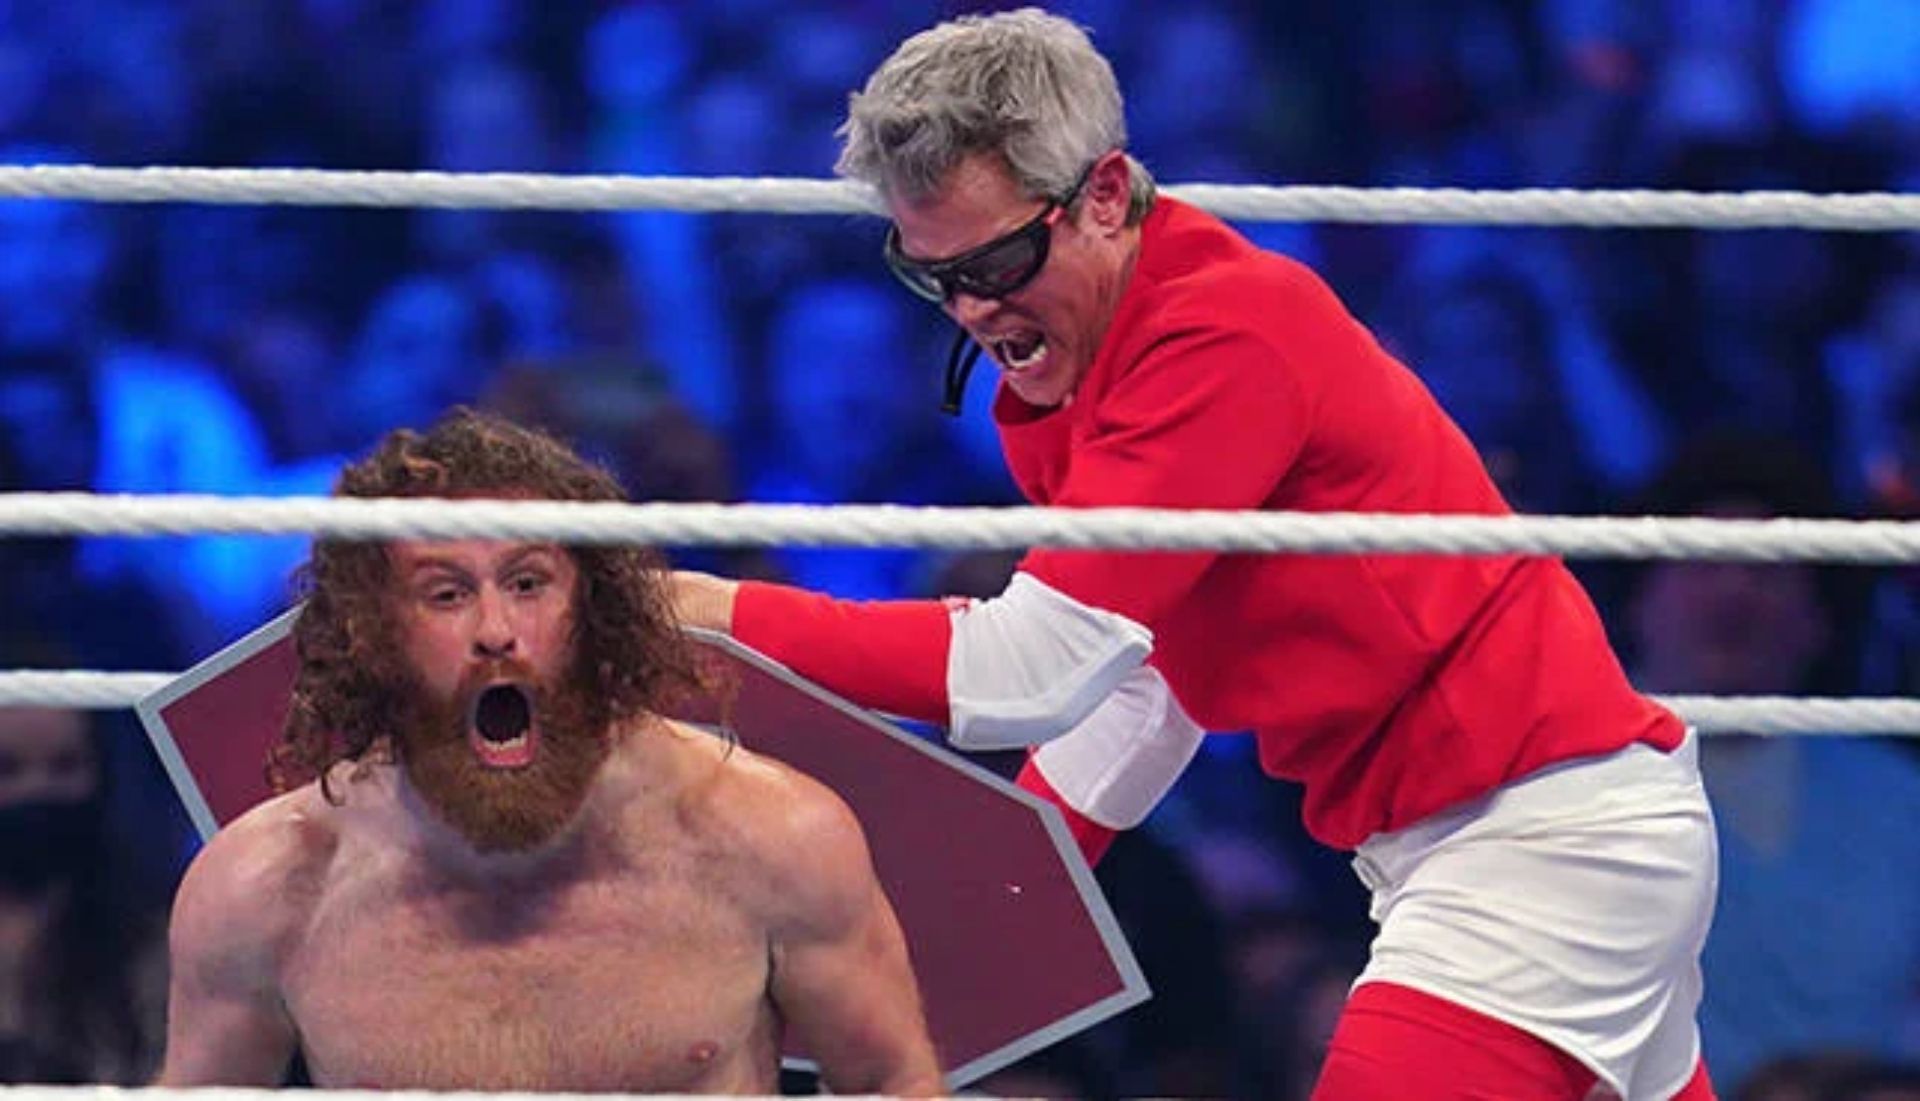 Sami Zayn had one of the standout matches at WrestleMania 38.